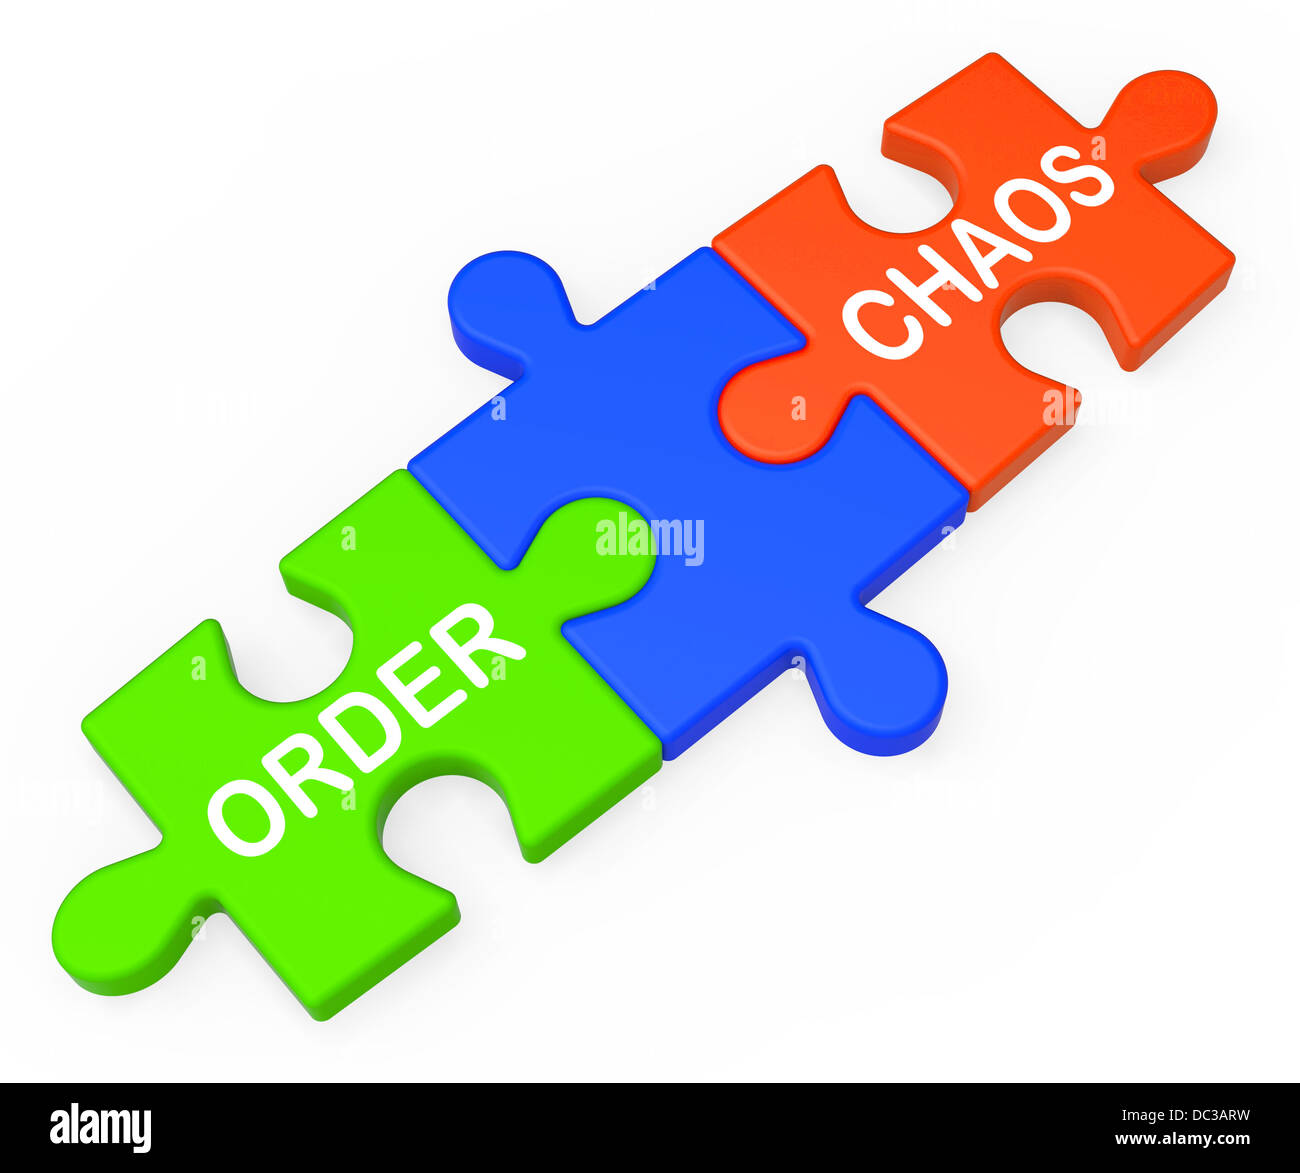 Order Chaos Shows Organized Or Unorganized Stock Photo